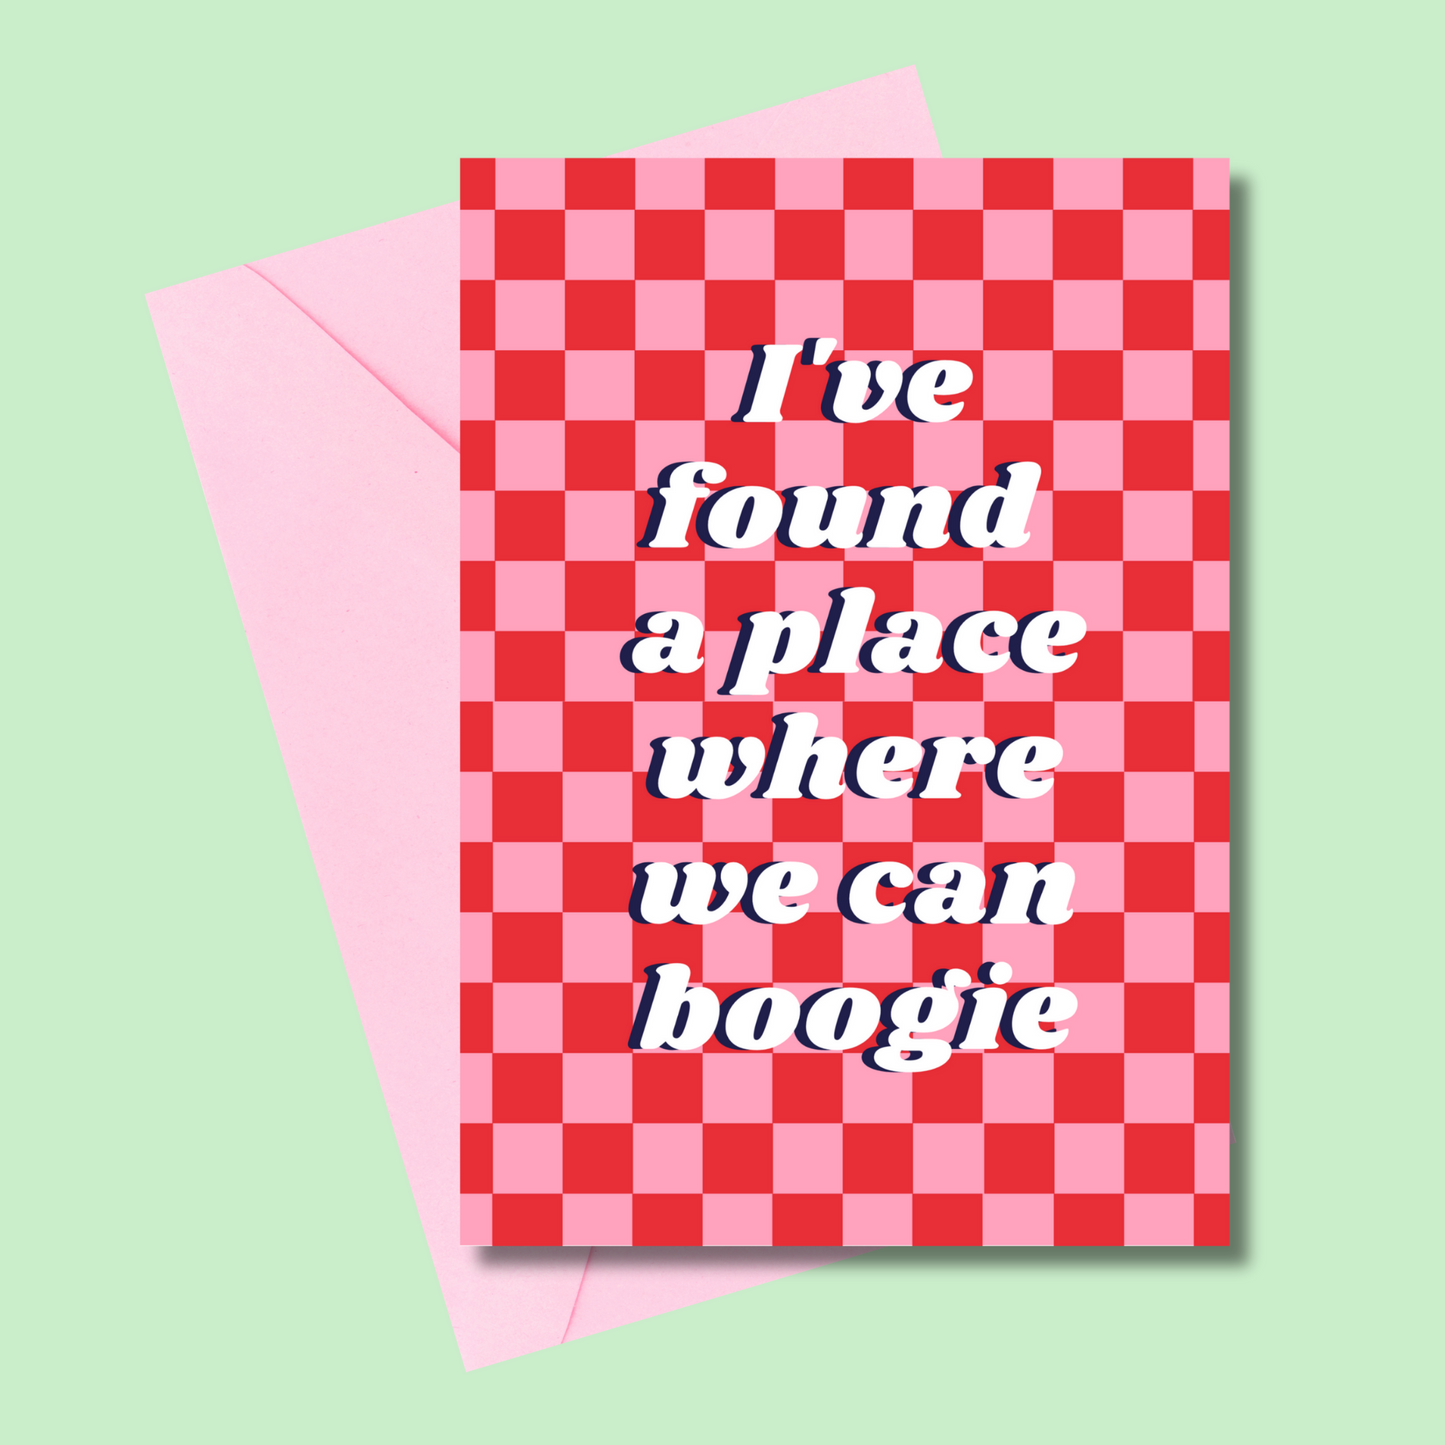 I've found a place where we can boogie (5x7” print/card)